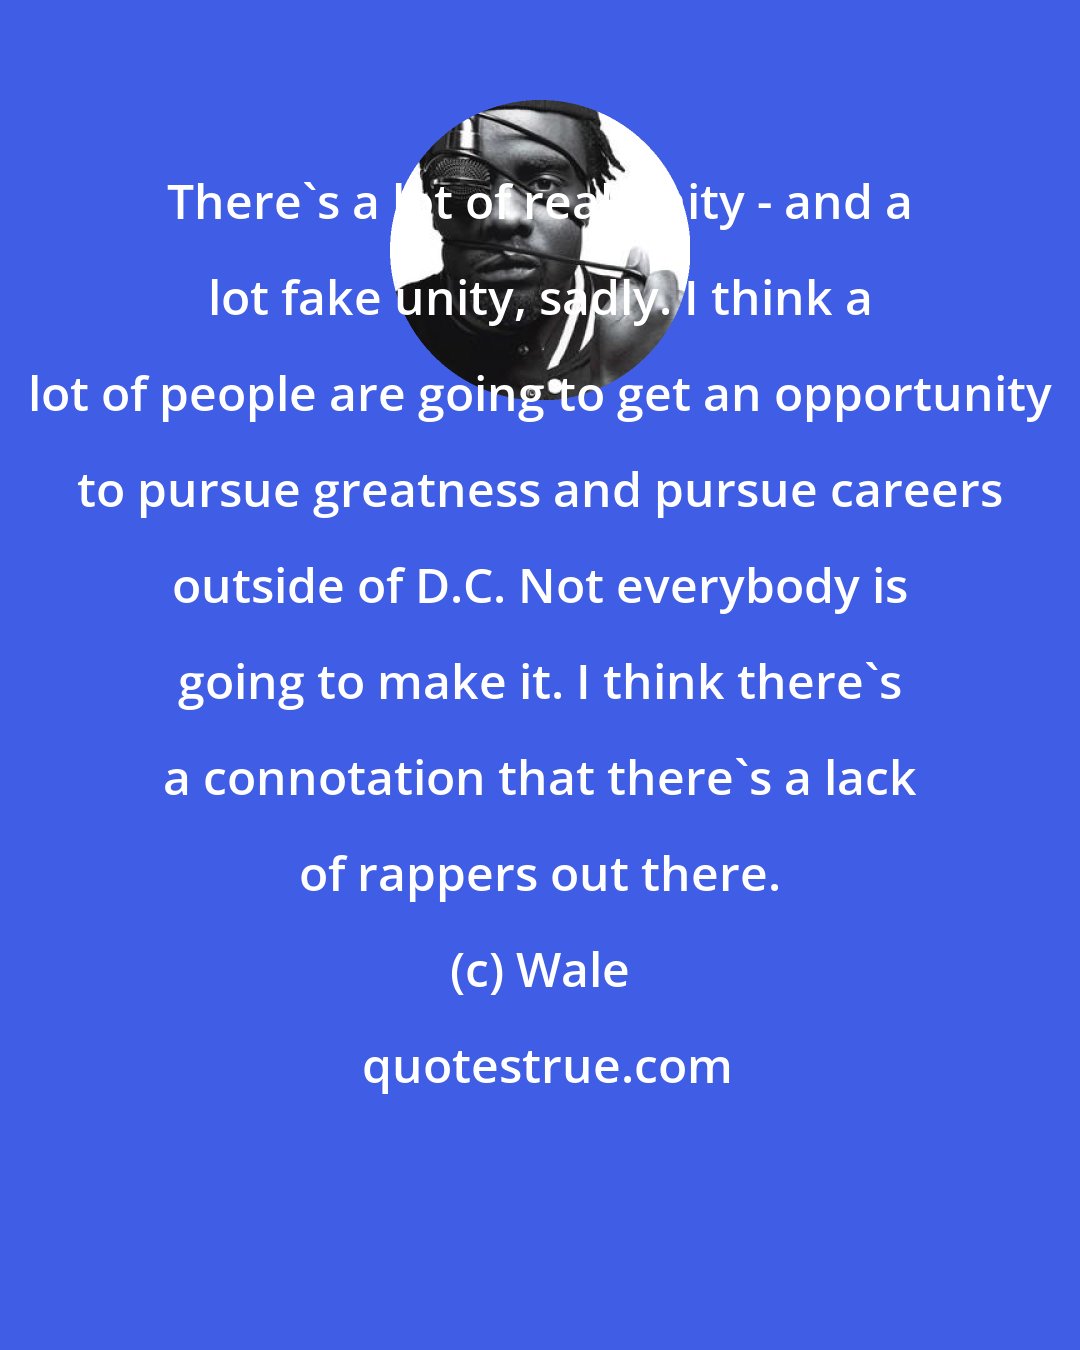 Wale: There's a lot of real unity - and a lot fake unity, sadly. I think a lot of people are going to get an opportunity to pursue greatness and pursue careers outside of D.C. Not everybody is going to make it. I think there's a connotation that there's a lack of rappers out there.